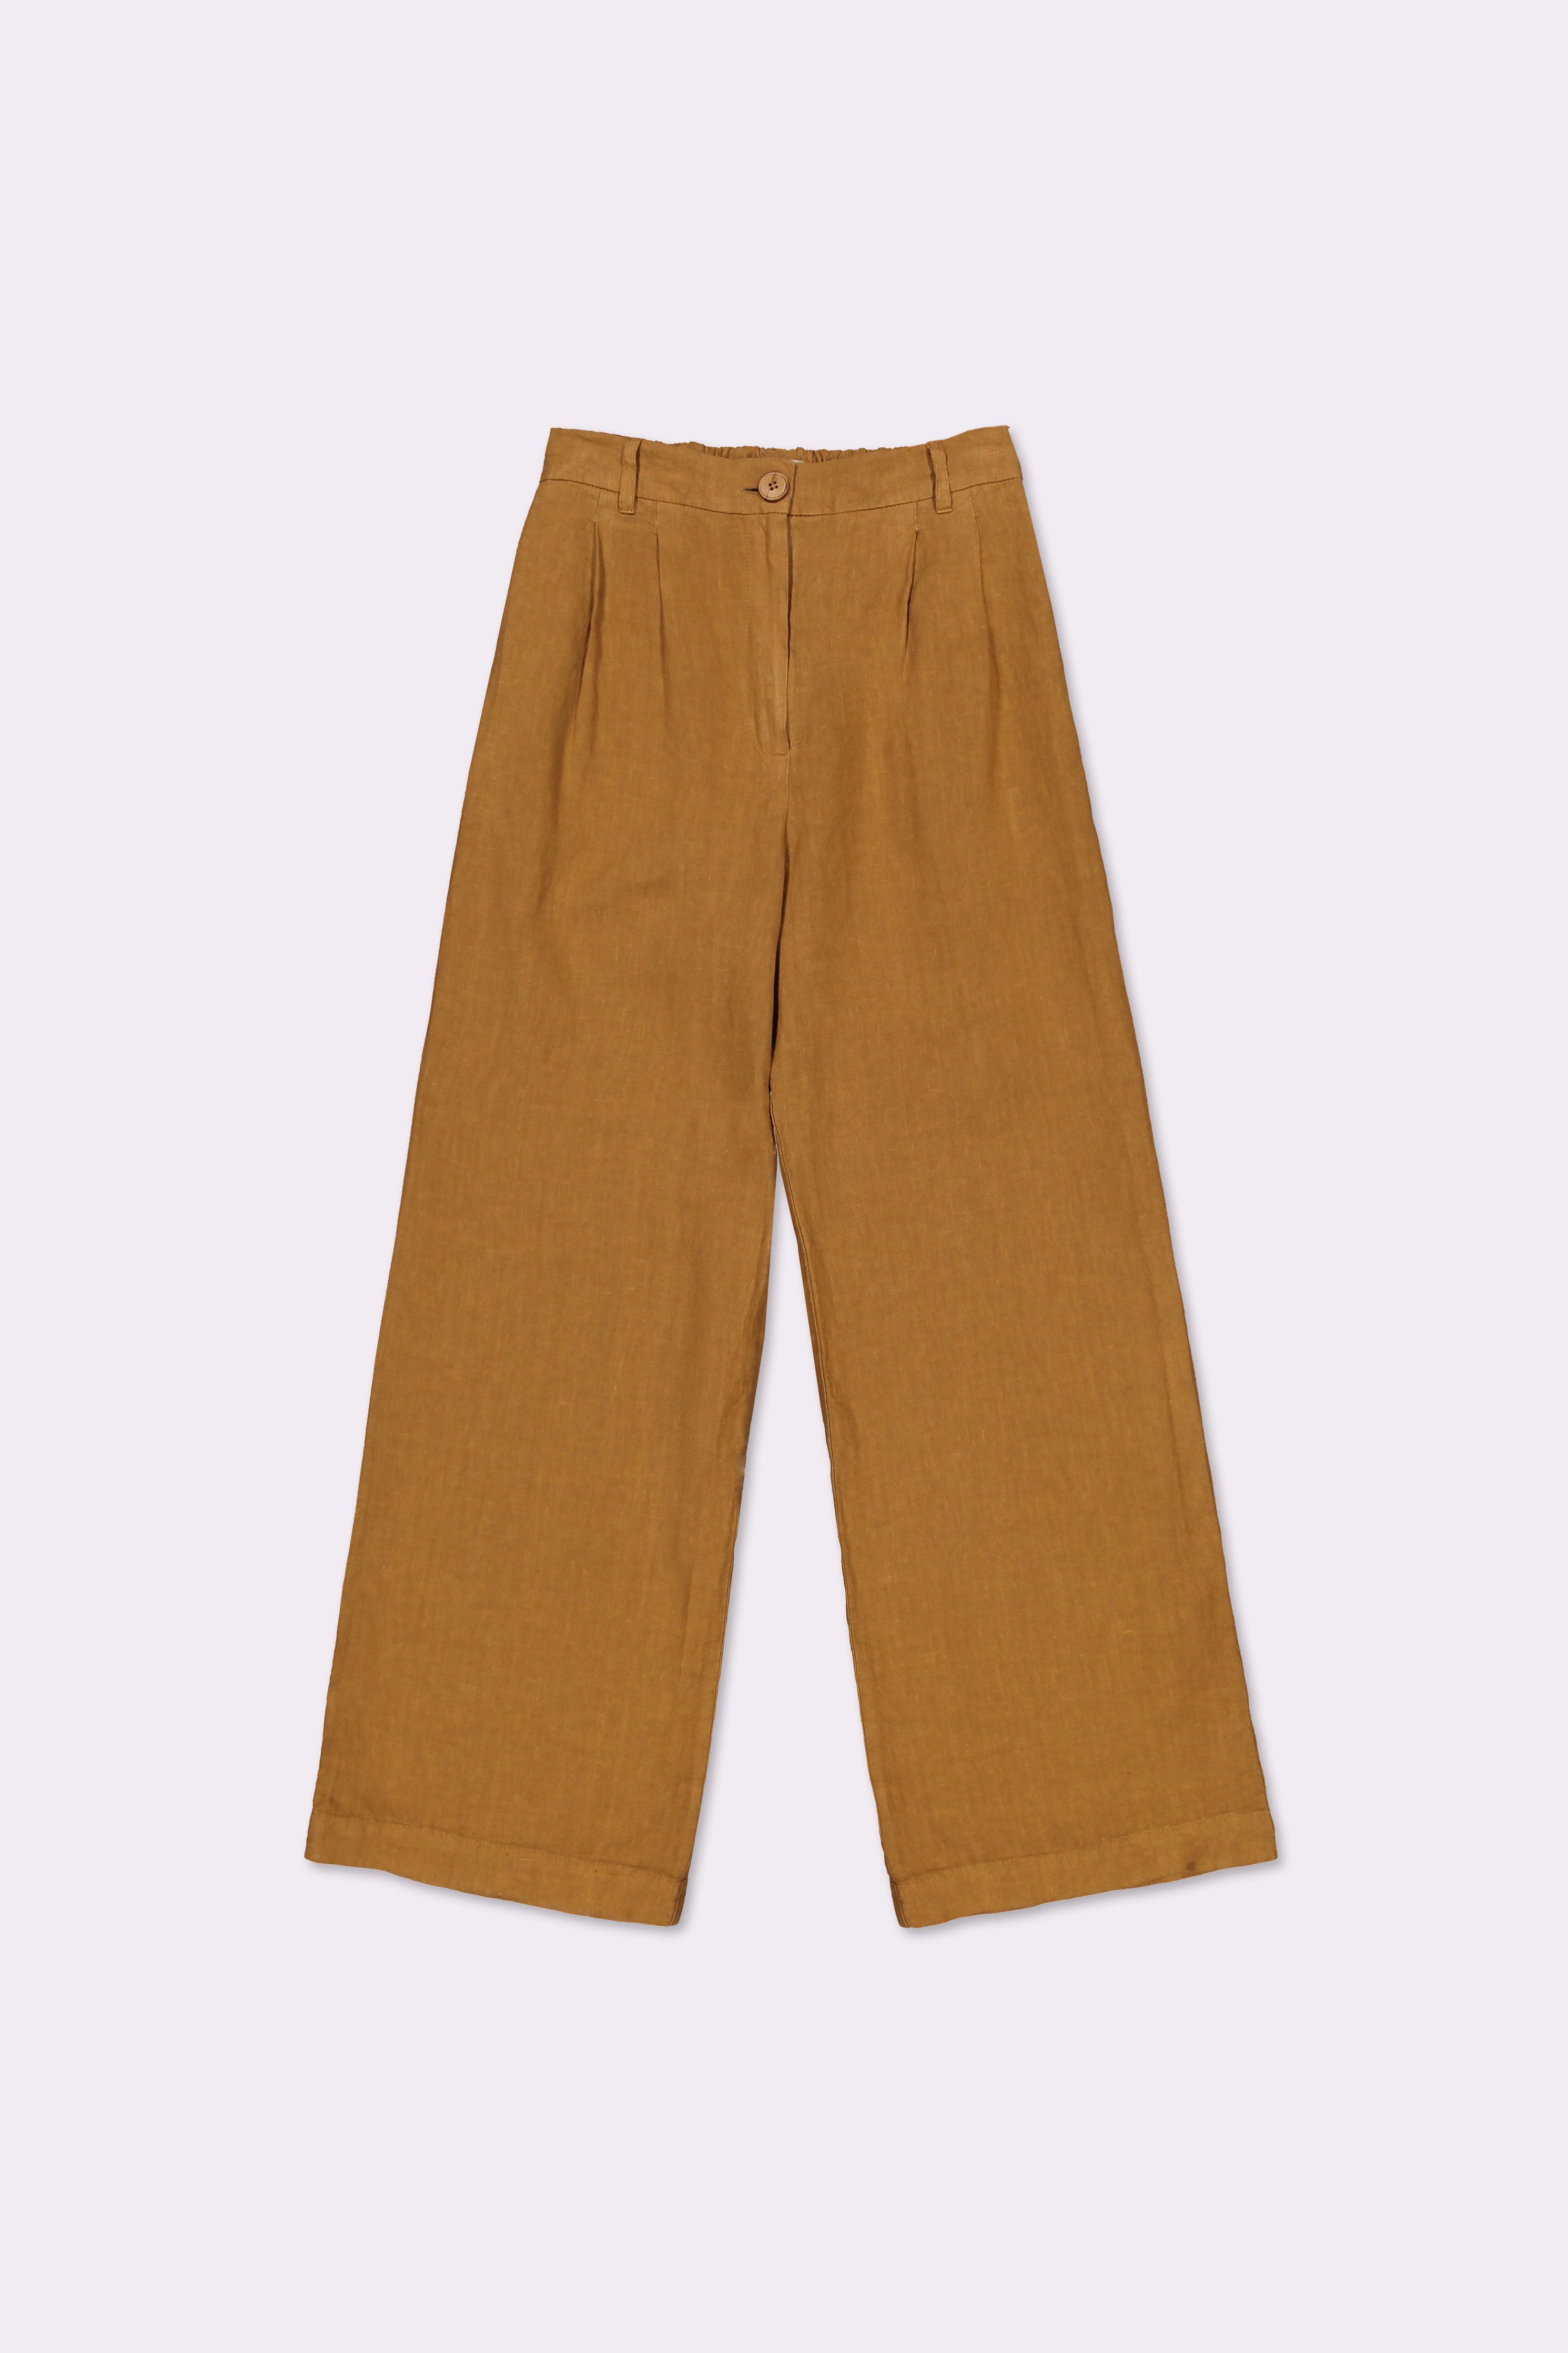 Naz women's linen trousers. High-waisted straight fit. Made in Portugal.